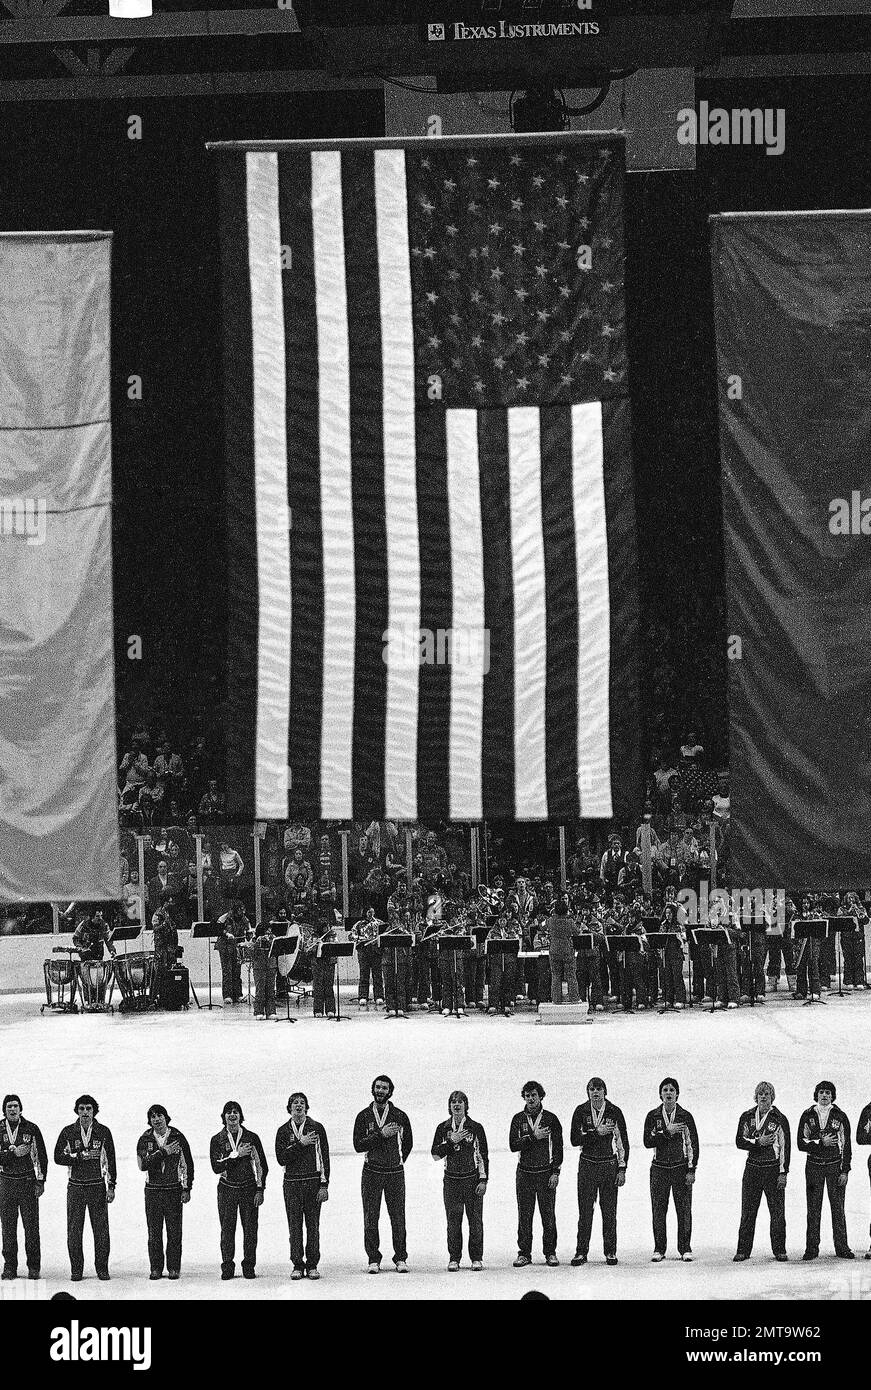 FILE - In this Feb. 24, 1980, file photo, members of the USA ice